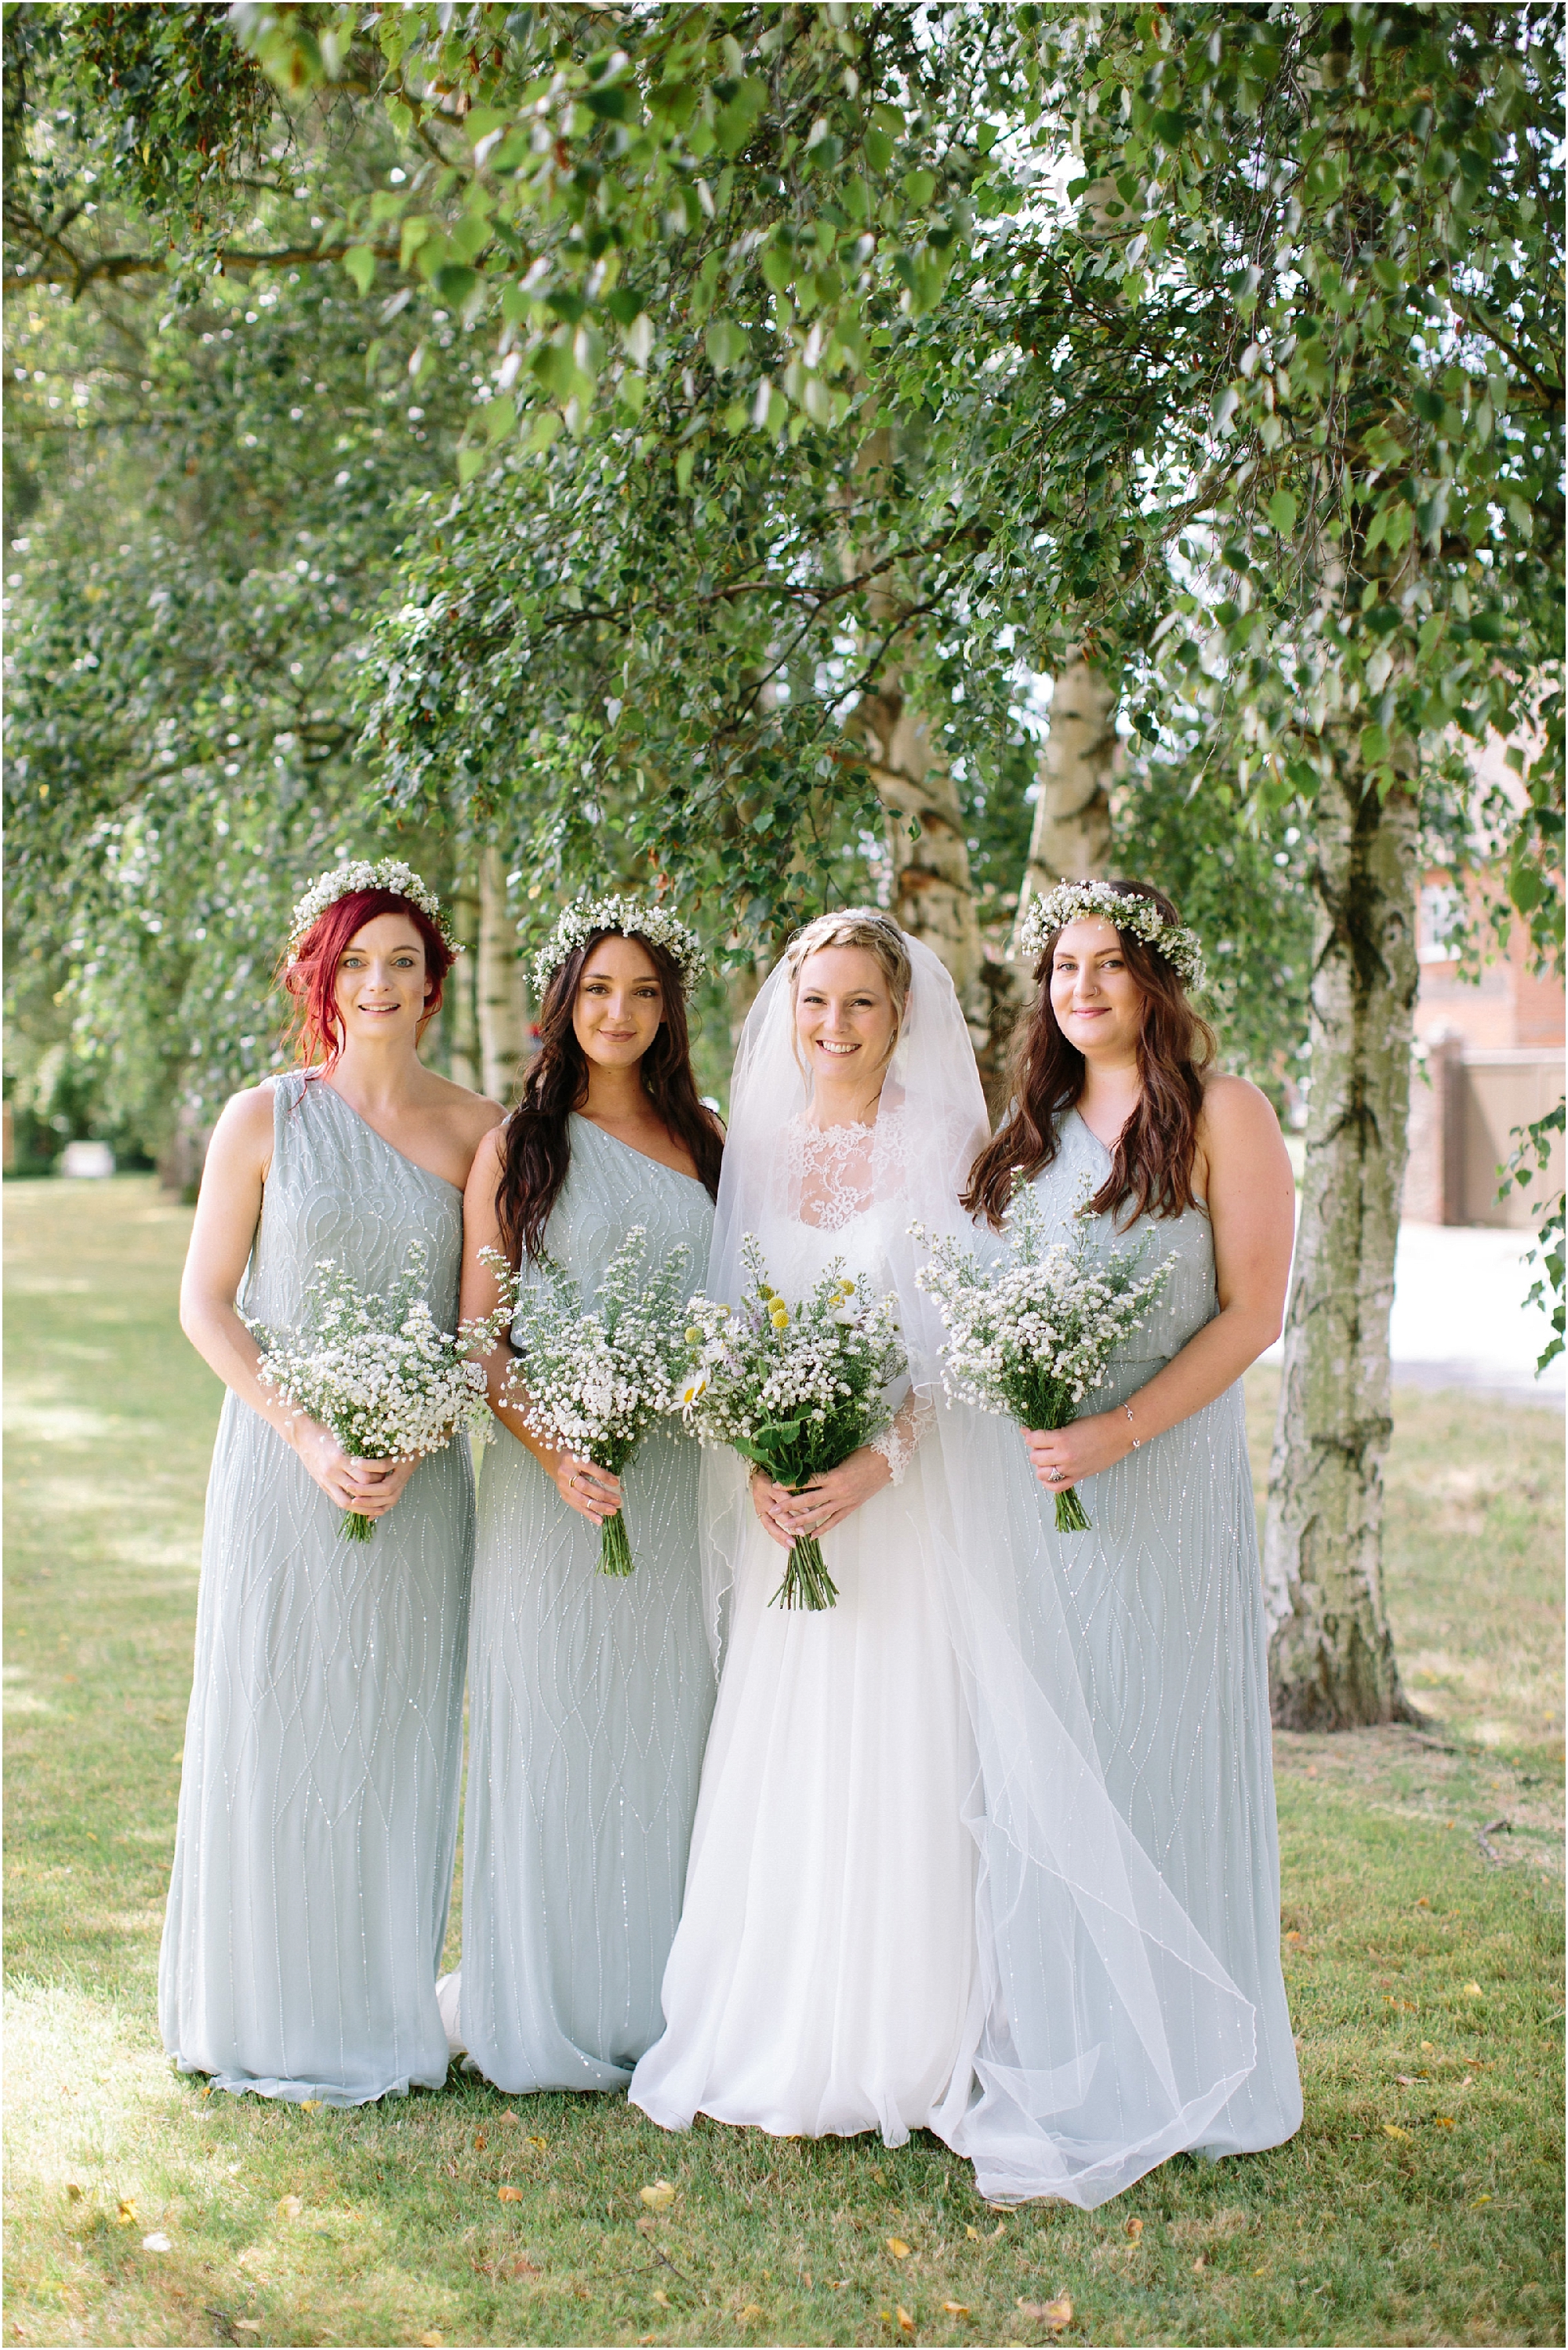 Bridesmaids in mint green beaded dresses